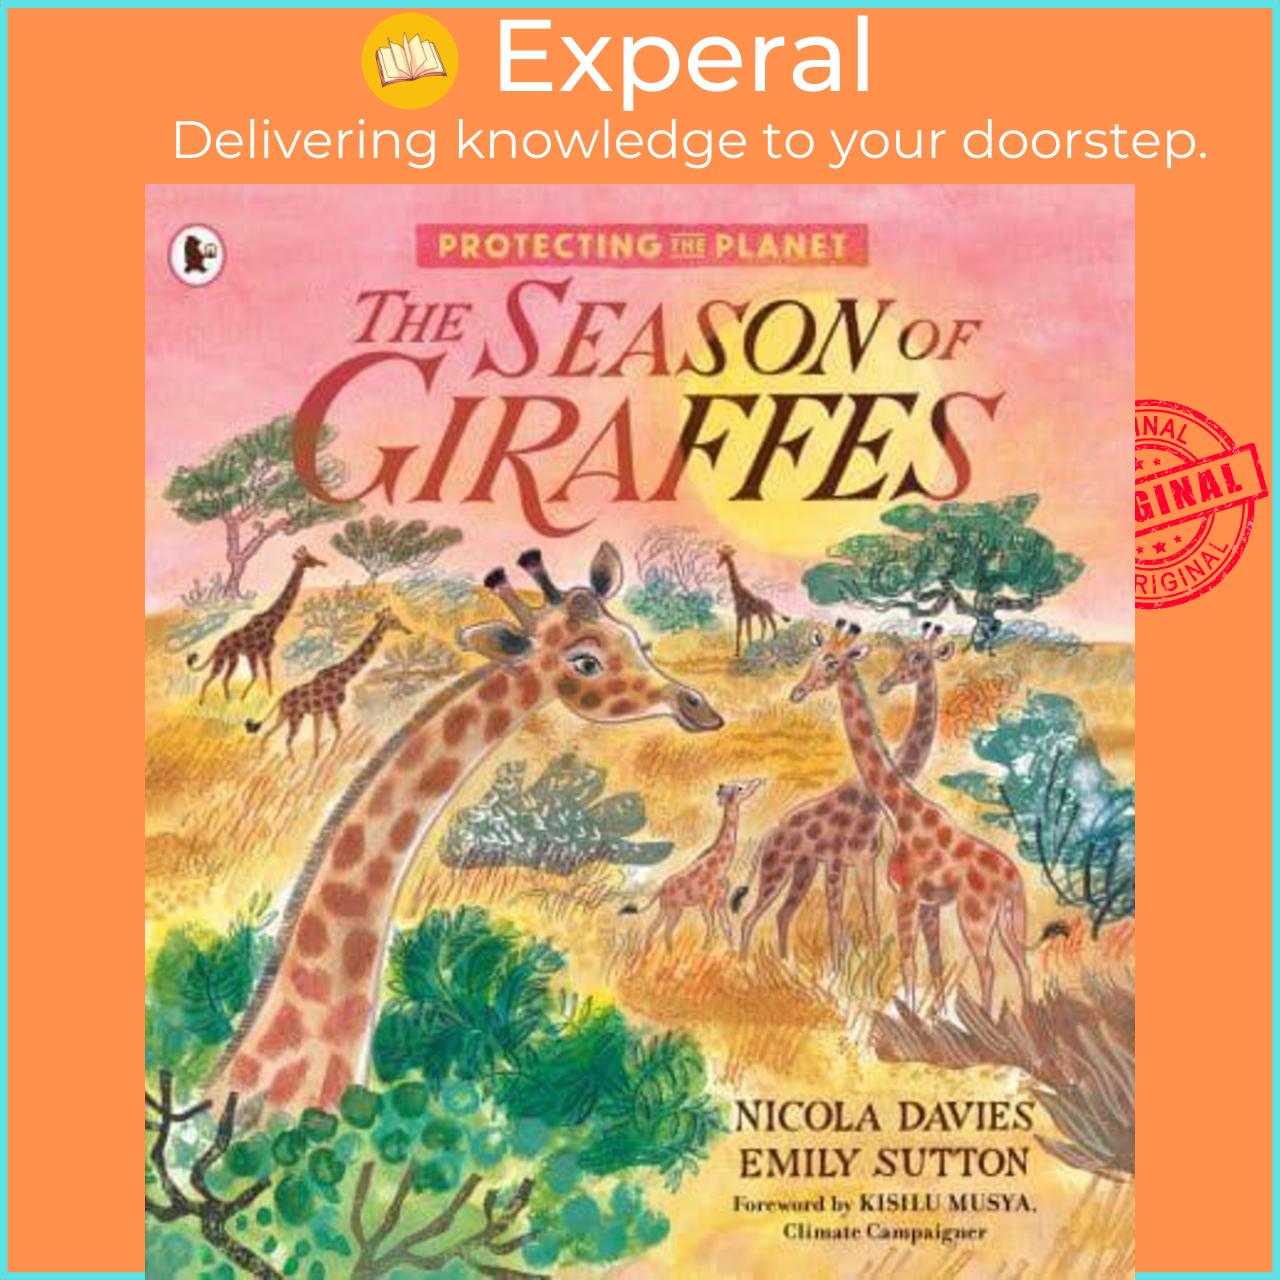 Sách - The Season of Giraffes - Protecting the P by Nicola Davies (author),Emily Sutton (artist) (UK edition, Paperback)